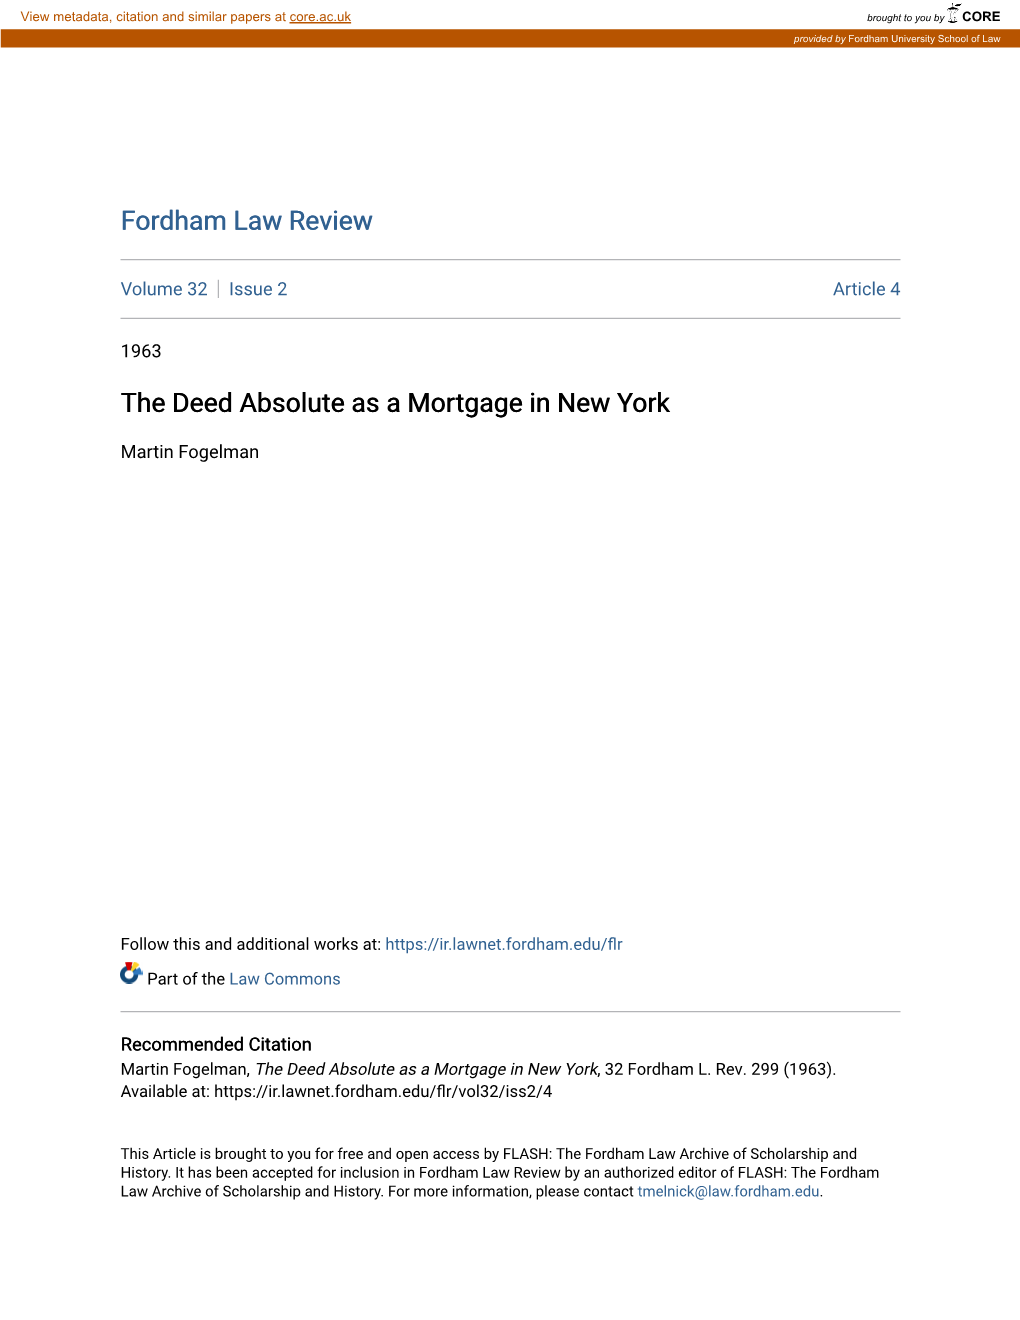 The Deed Absolute As a Mortgage in New York